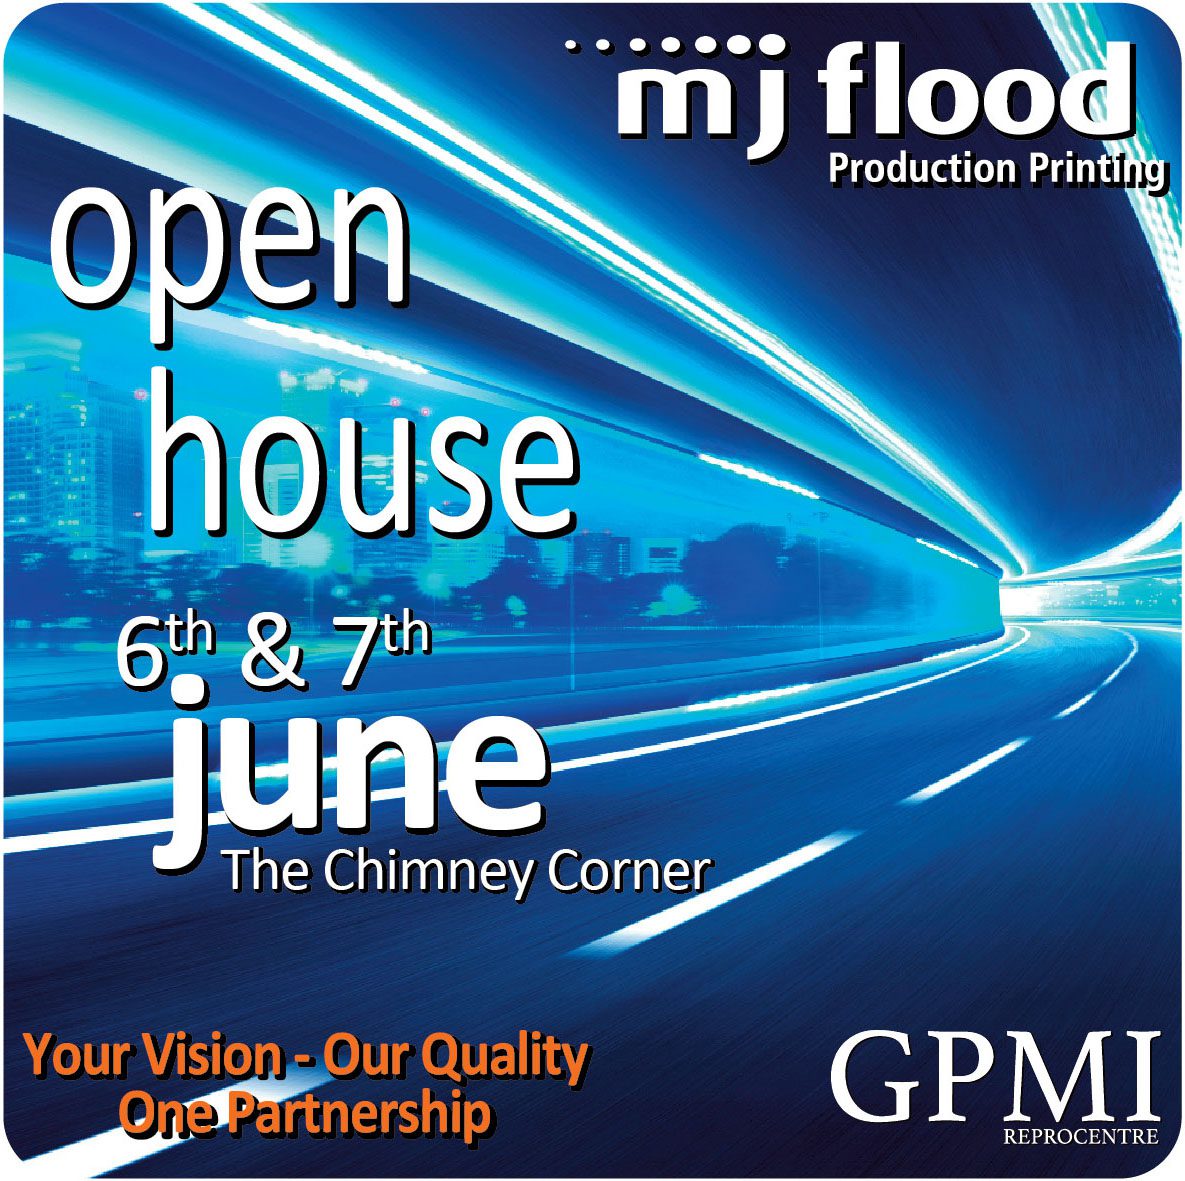 MJ Flood and GPMI host Digital Print & Finishing Event in Northern Ireland